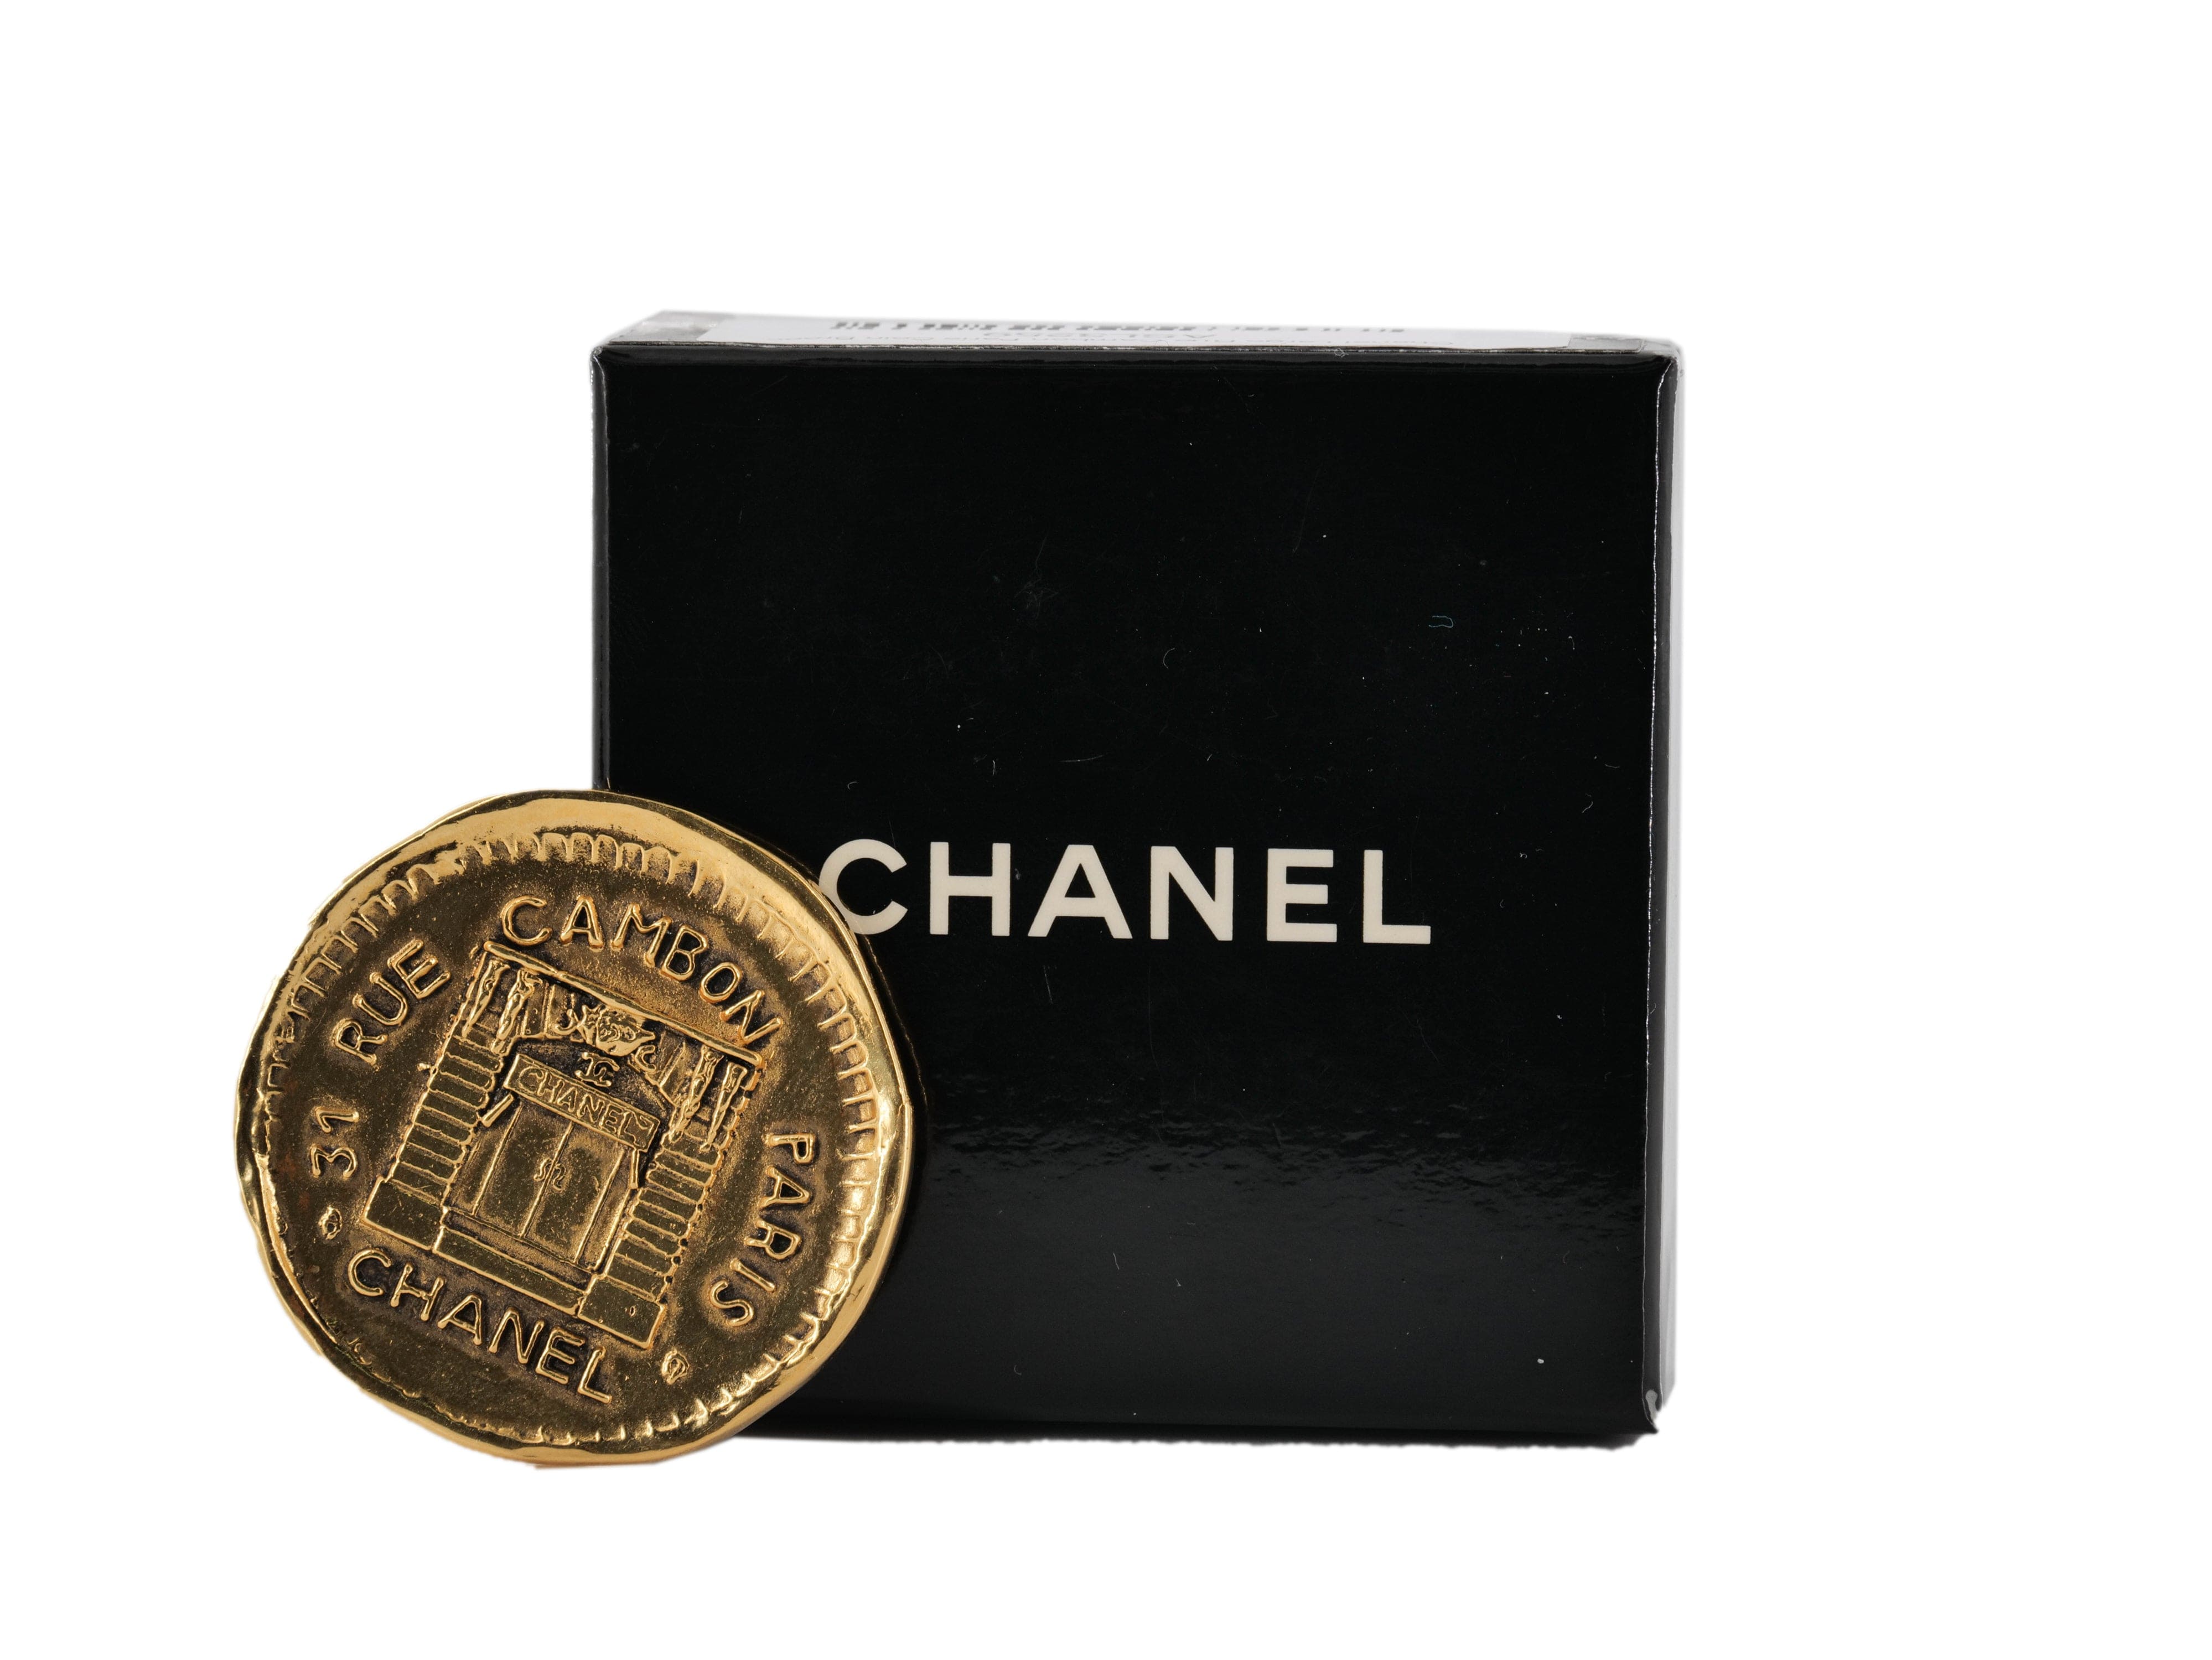 Chanel Chanel Large Rue Cambon Paris Coin Brooch ASL3259